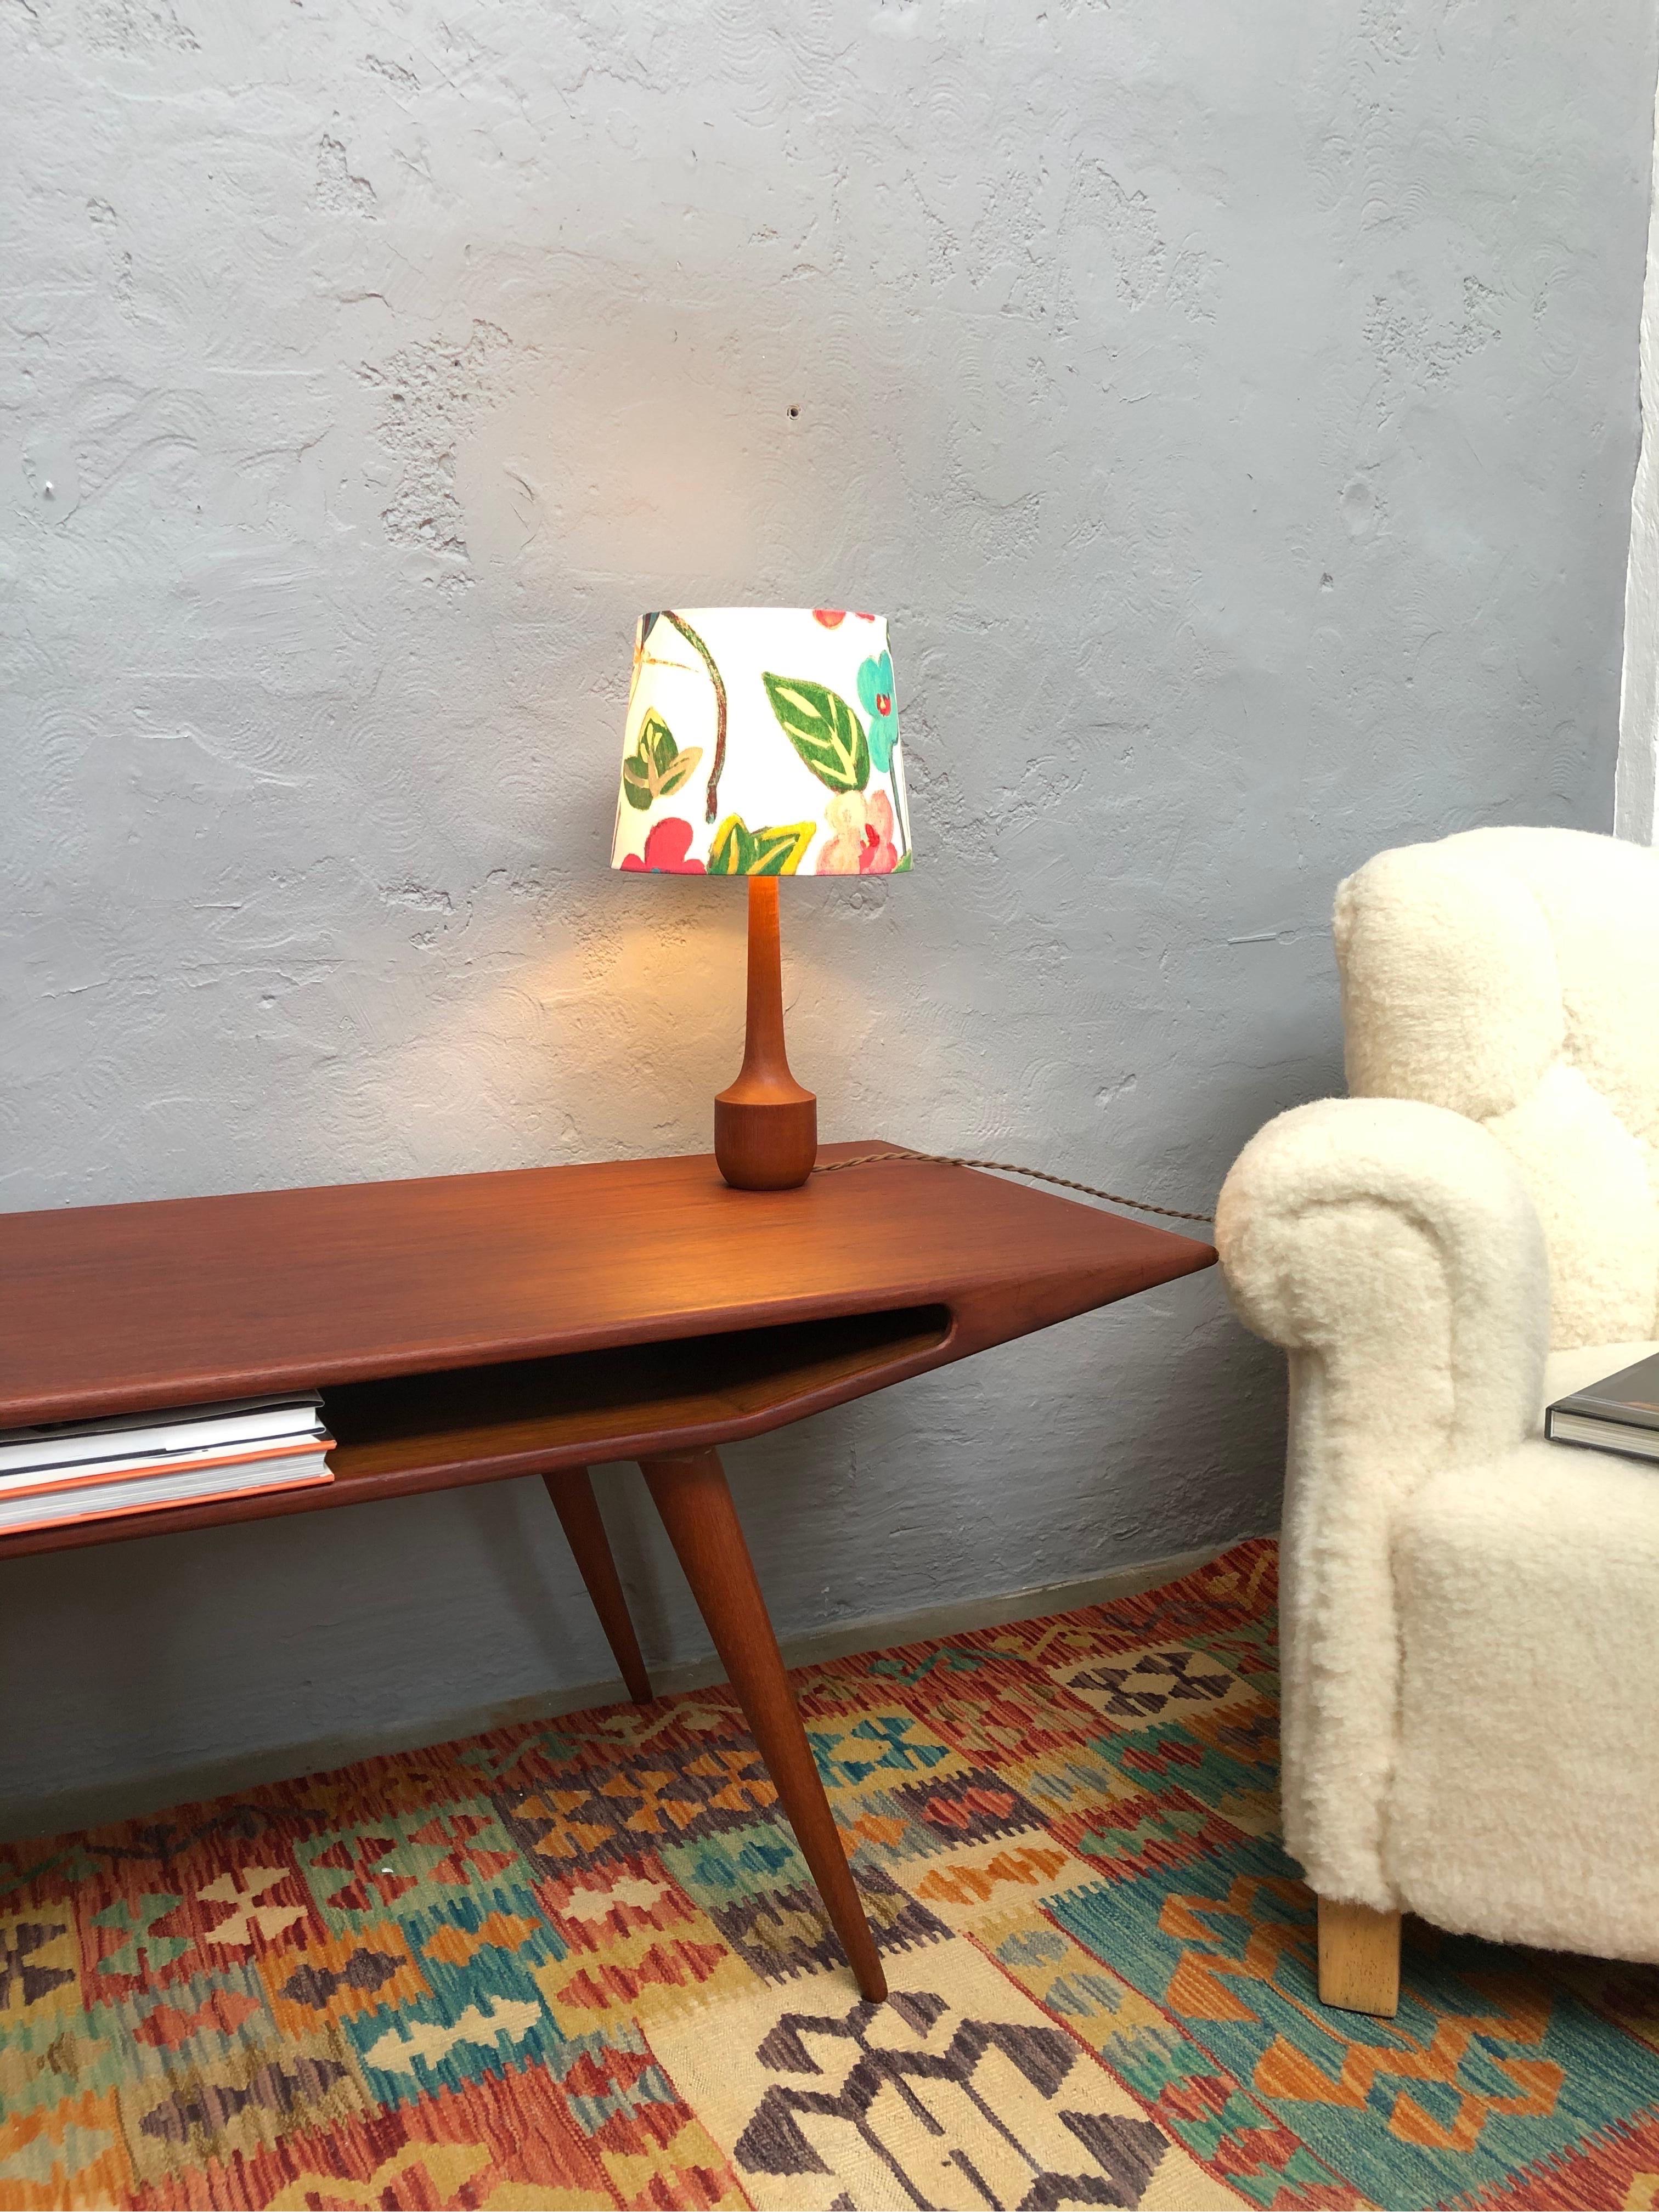 Vintage Danish Mid-Century Modern turned solid teak table lamp with a very elegant period design. 
Rewired and topped with a limited edition lampshade from ArtbyMaj in the manner of Josef Frank.
This beautiful floral design on a white cotton